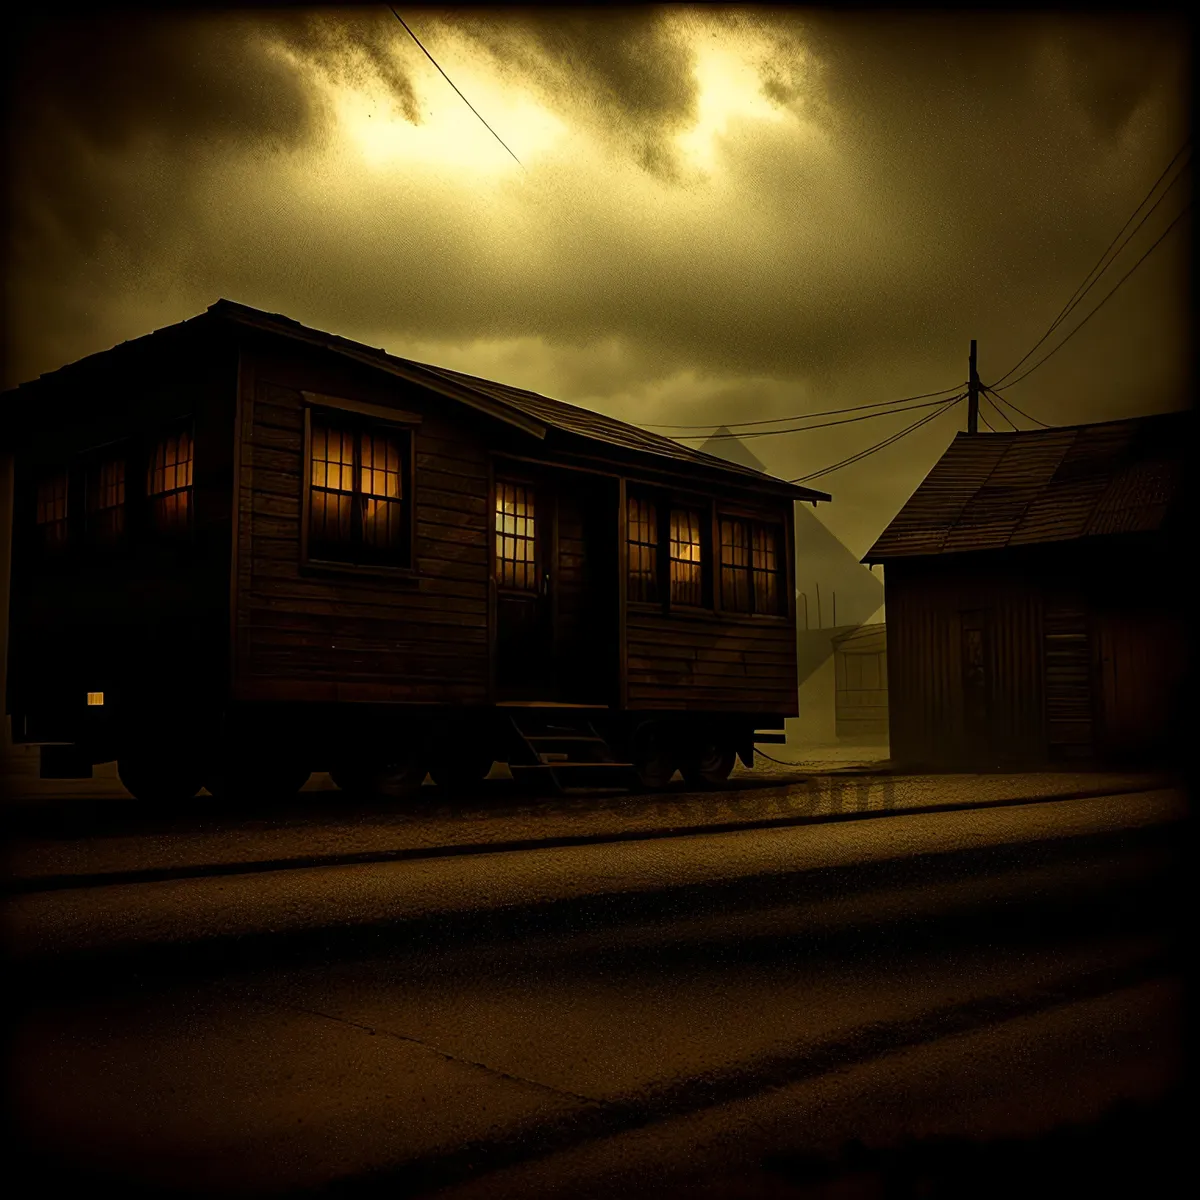 Picture of Urban Mobile Home on Railroad Tracks